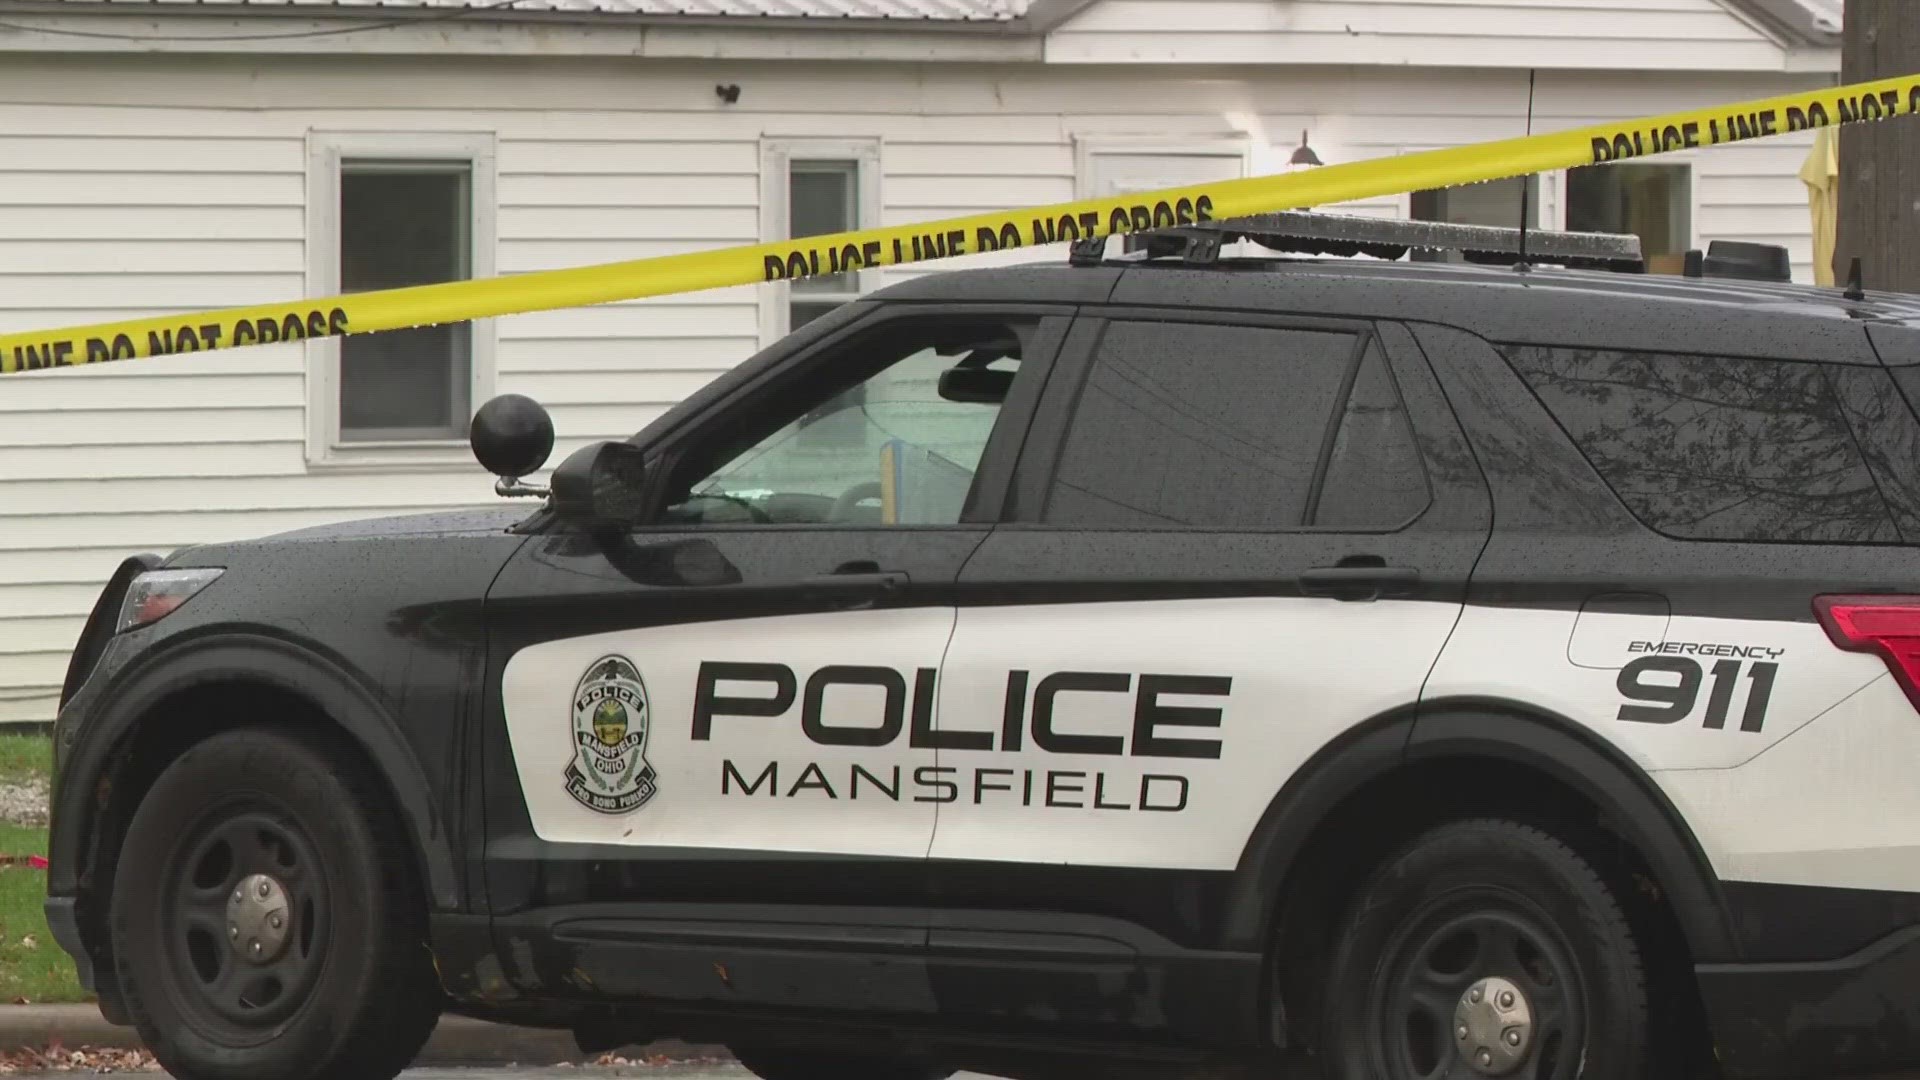 Mansfield police are investigating after a shooting happened overnight